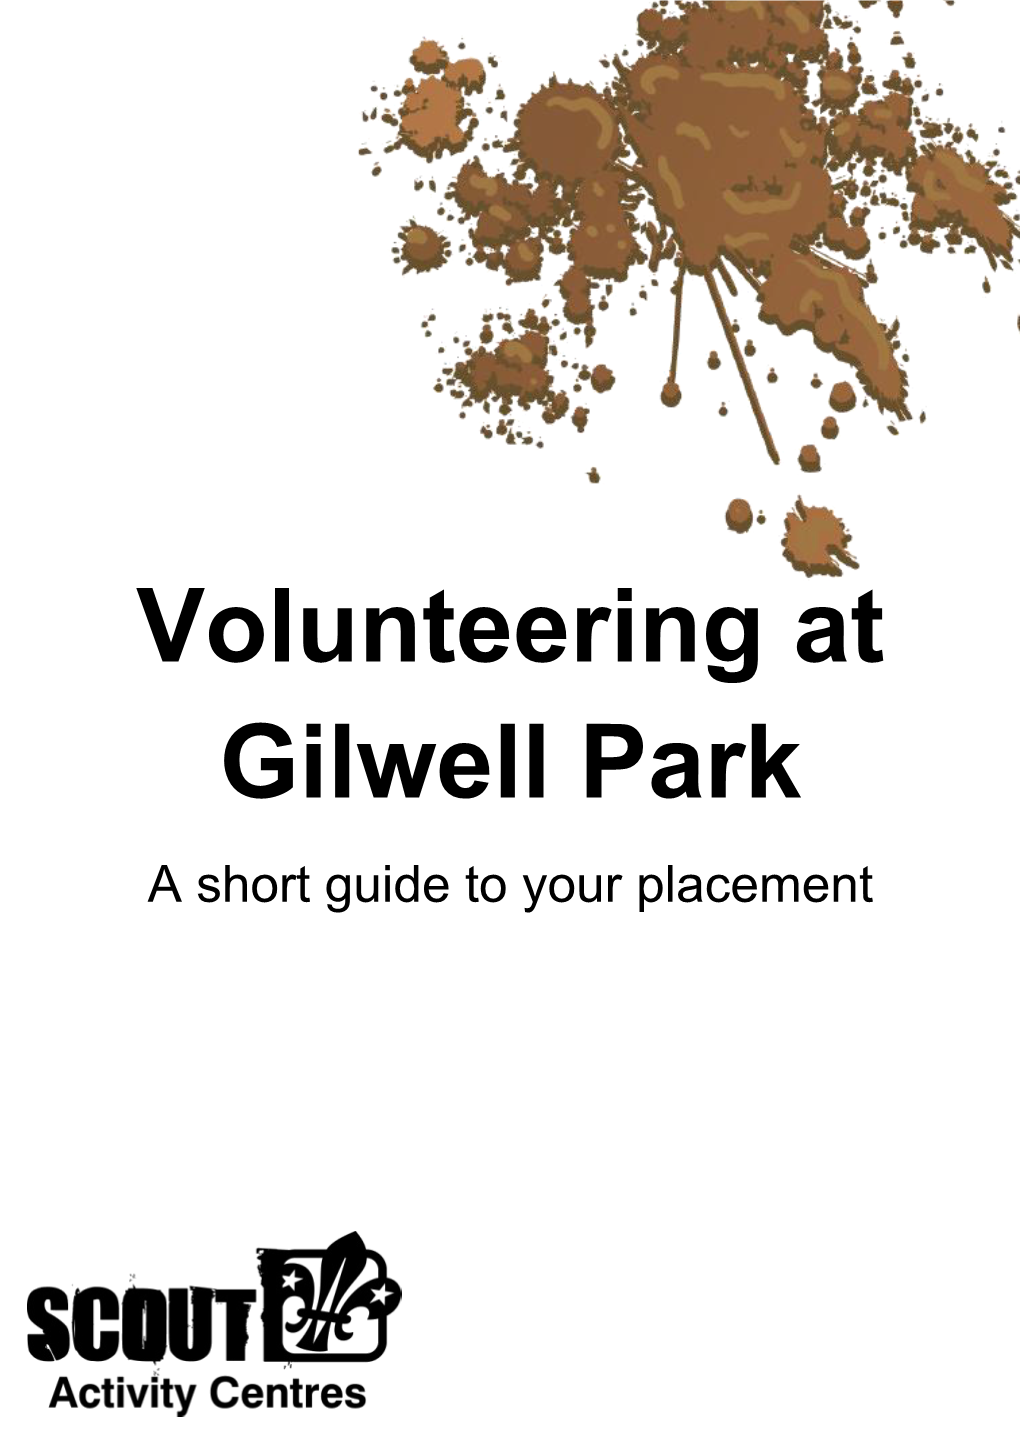 Volunteering at Gilwell Park a Short Guide to Your Placement